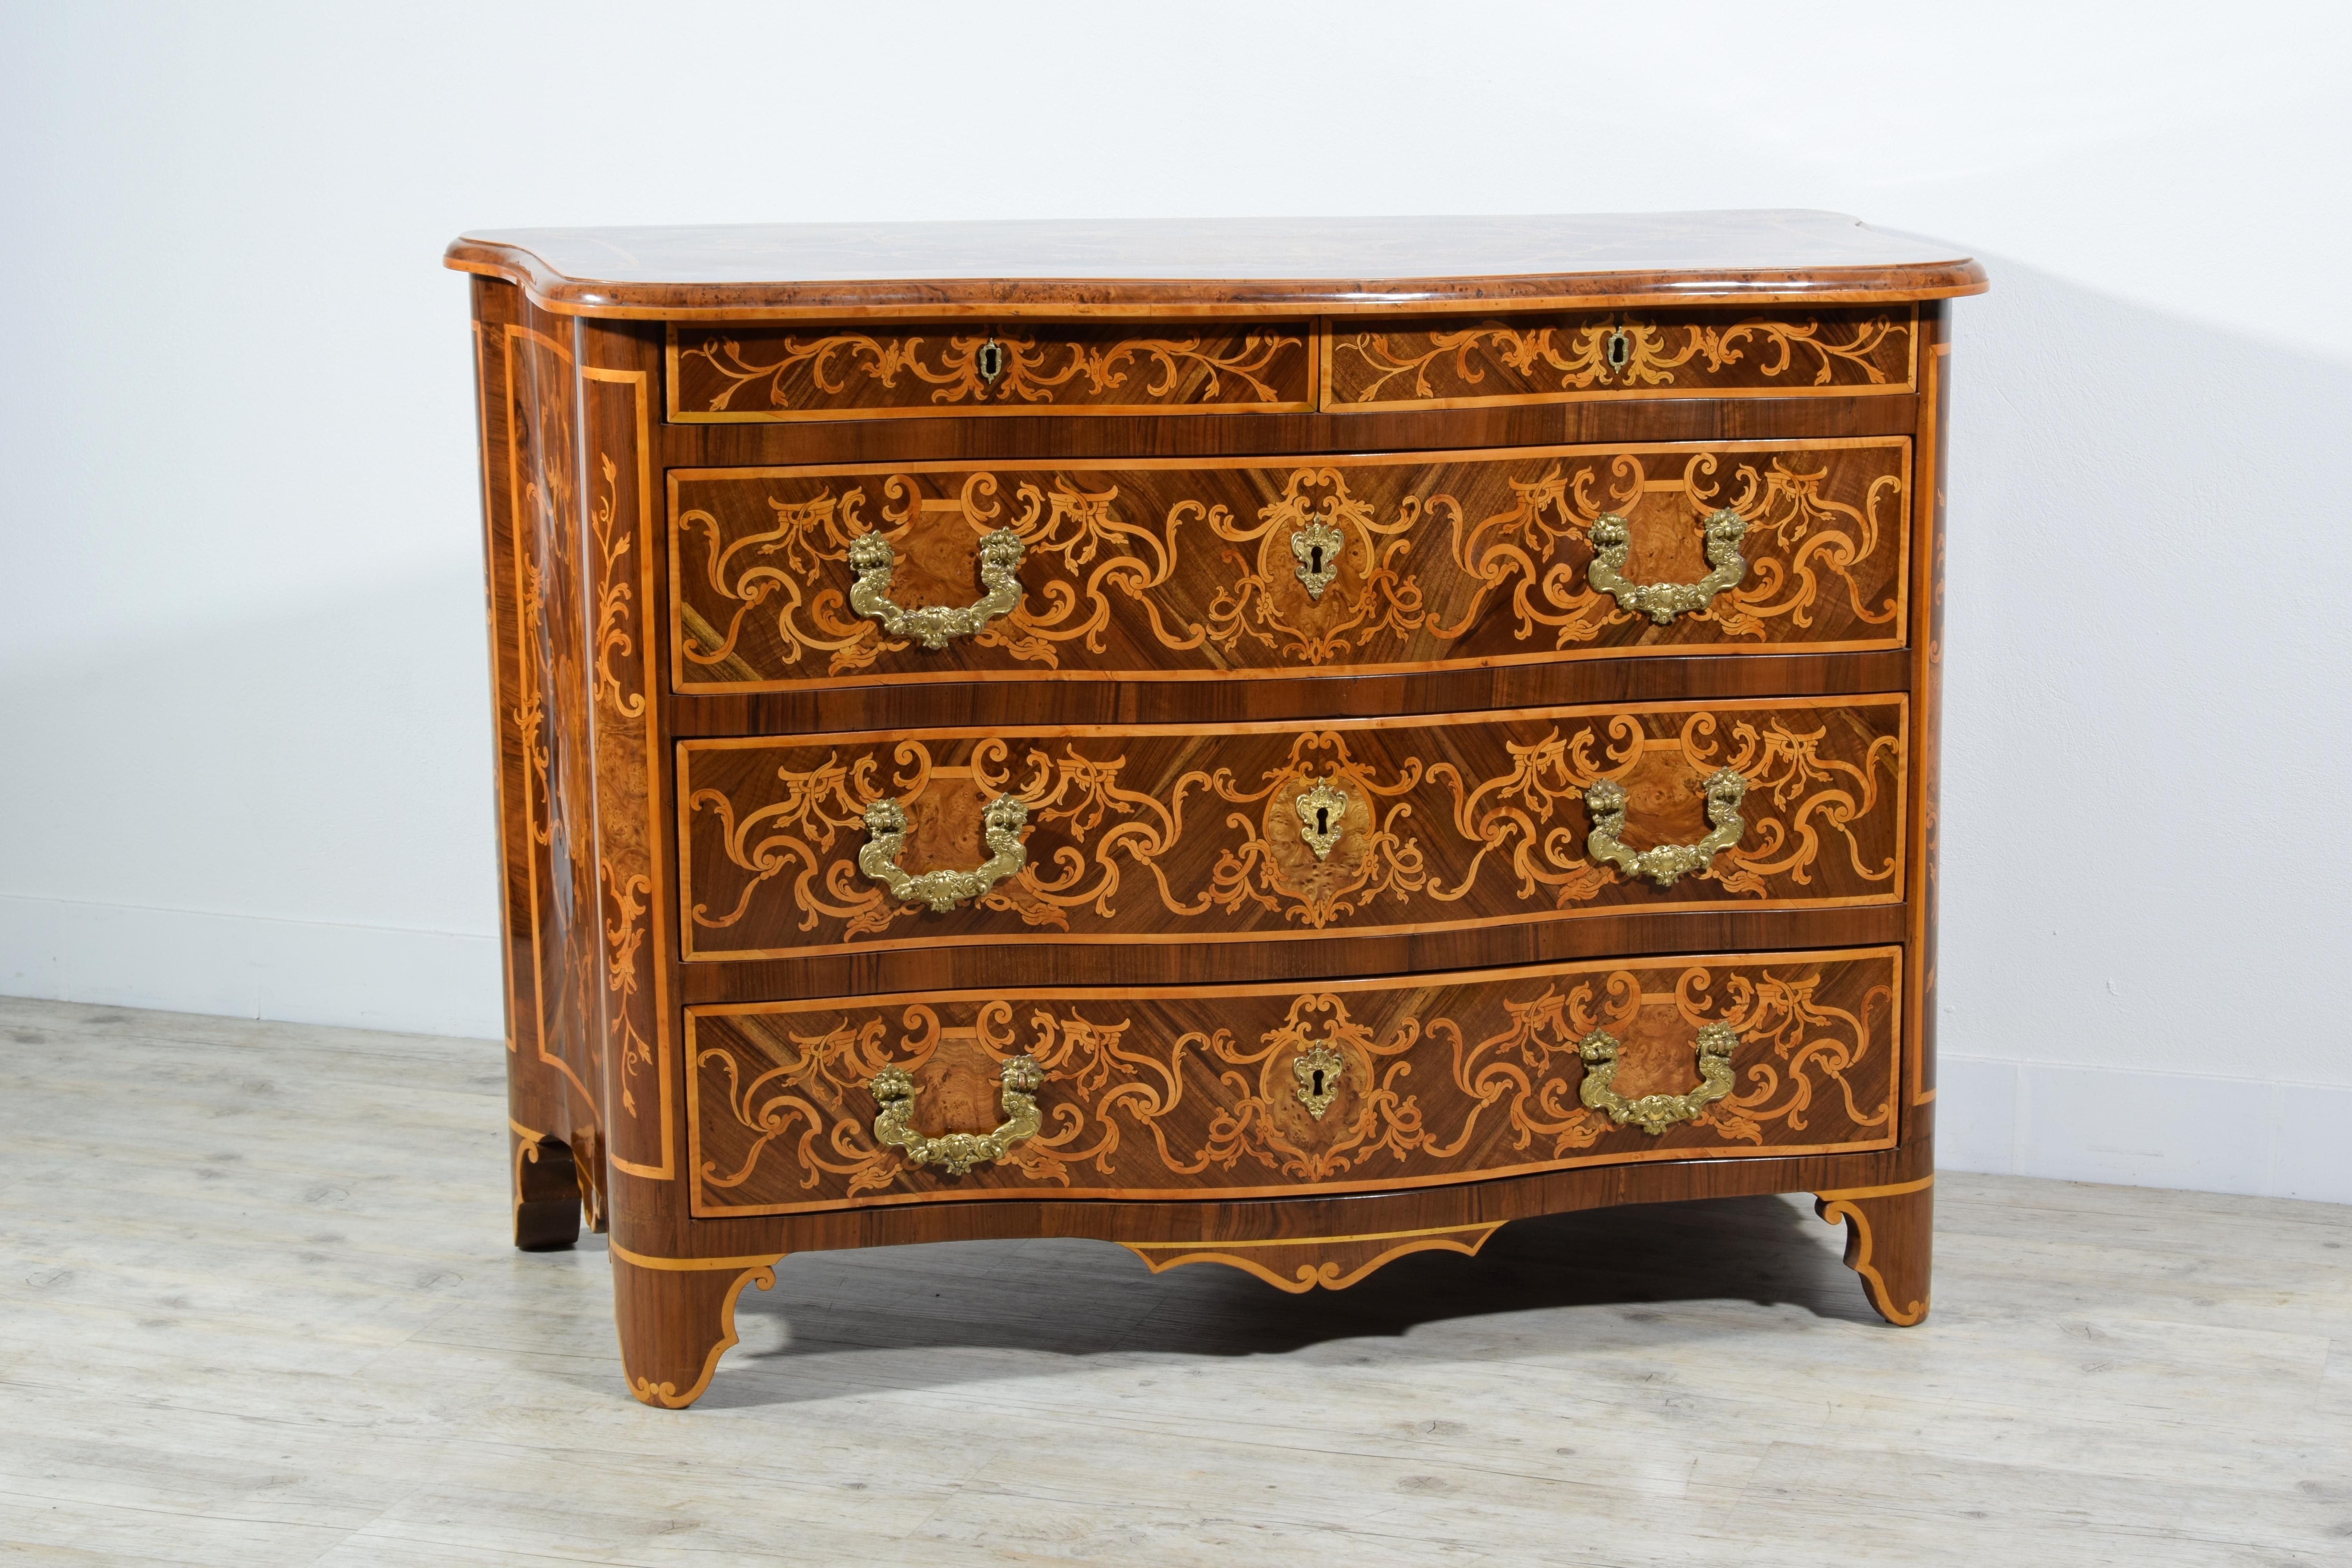 18th Century Italian Paved and Inlaid Wood Chest of Drawers 11